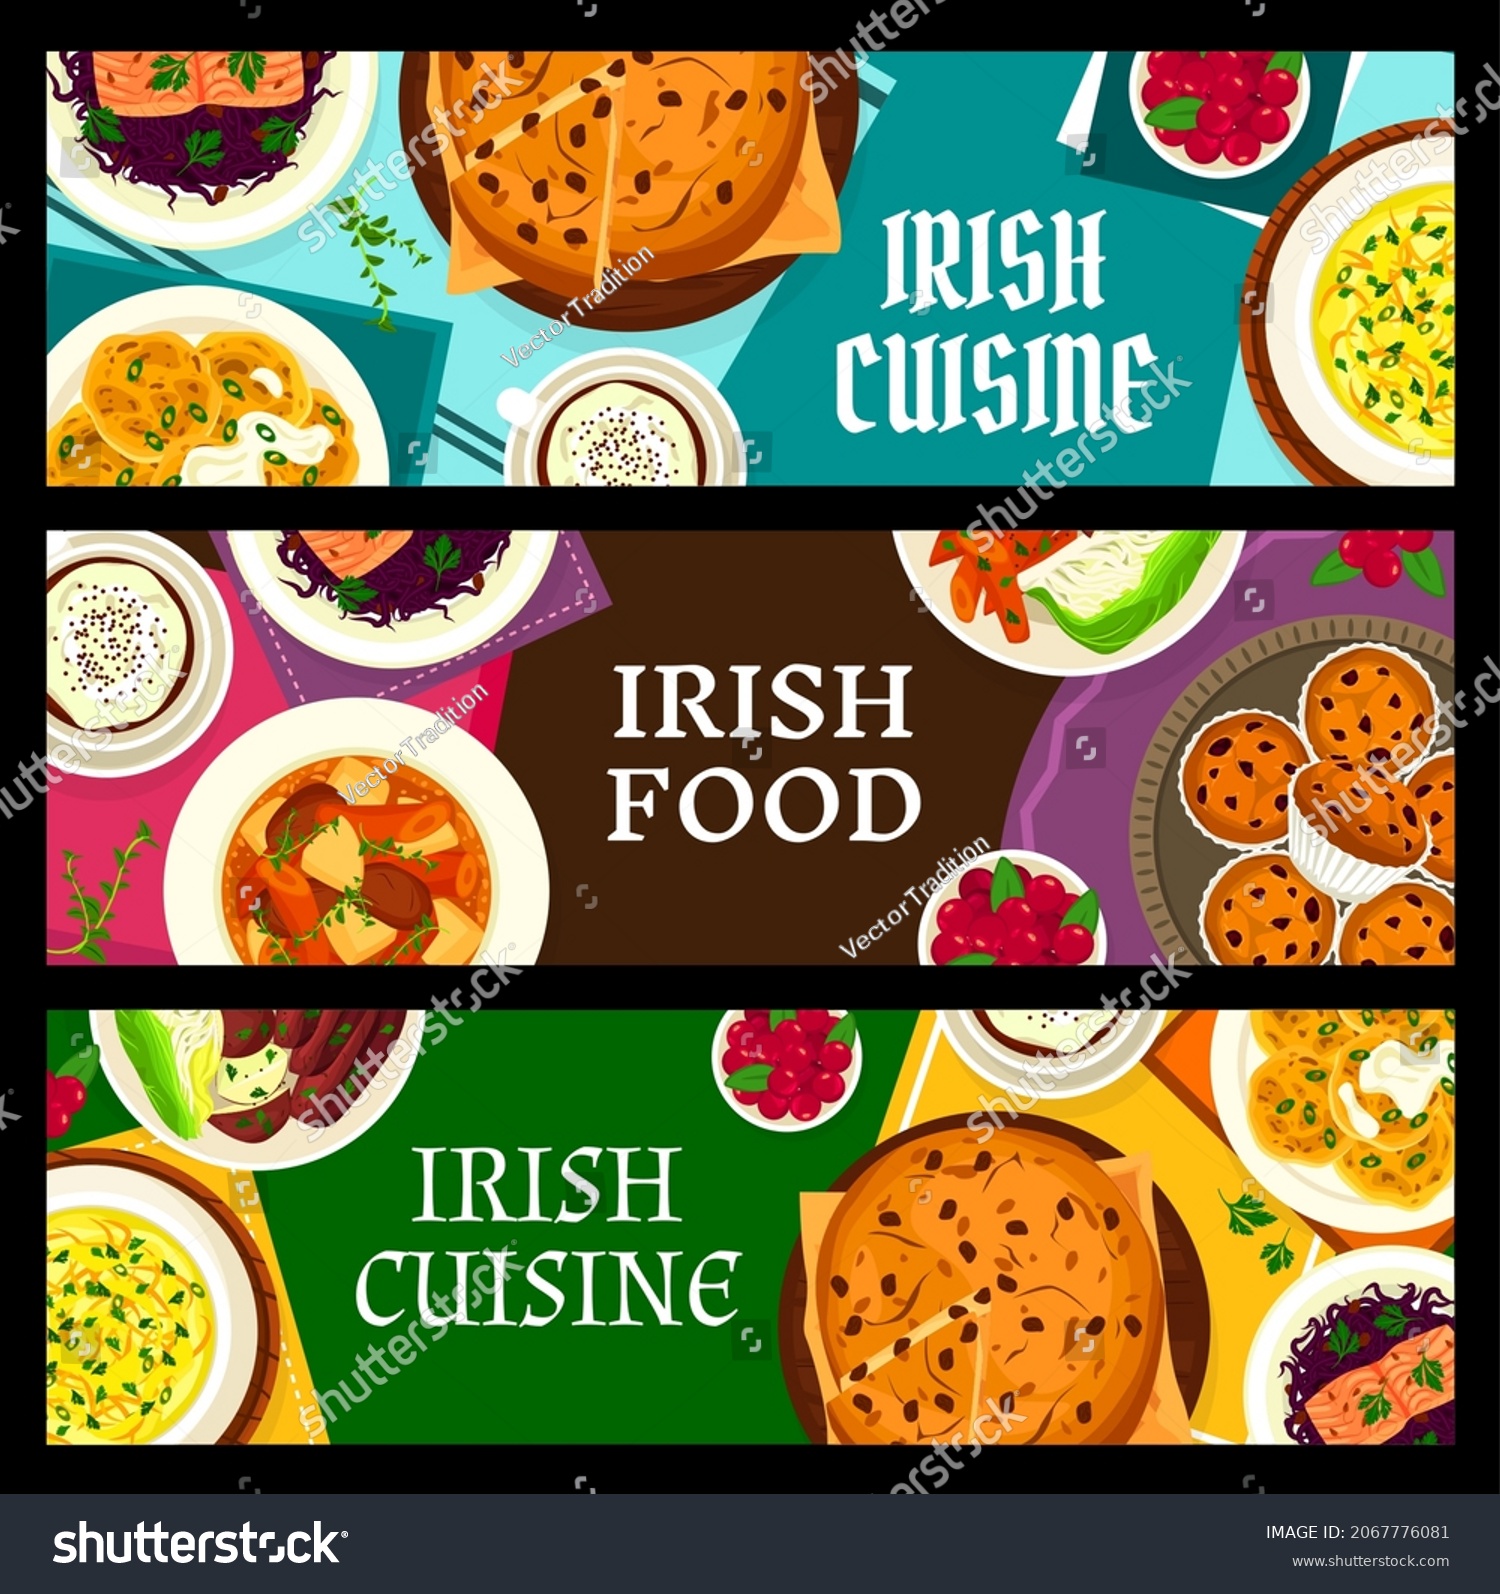 SVG of Irish cuisine vector banners cowberry cupcakes, potato pancake boxty, fish soup and soda bread with raisins. Vegetable lamb stew, black pudding and red cabbage salad with salmon meals of Ireland svg